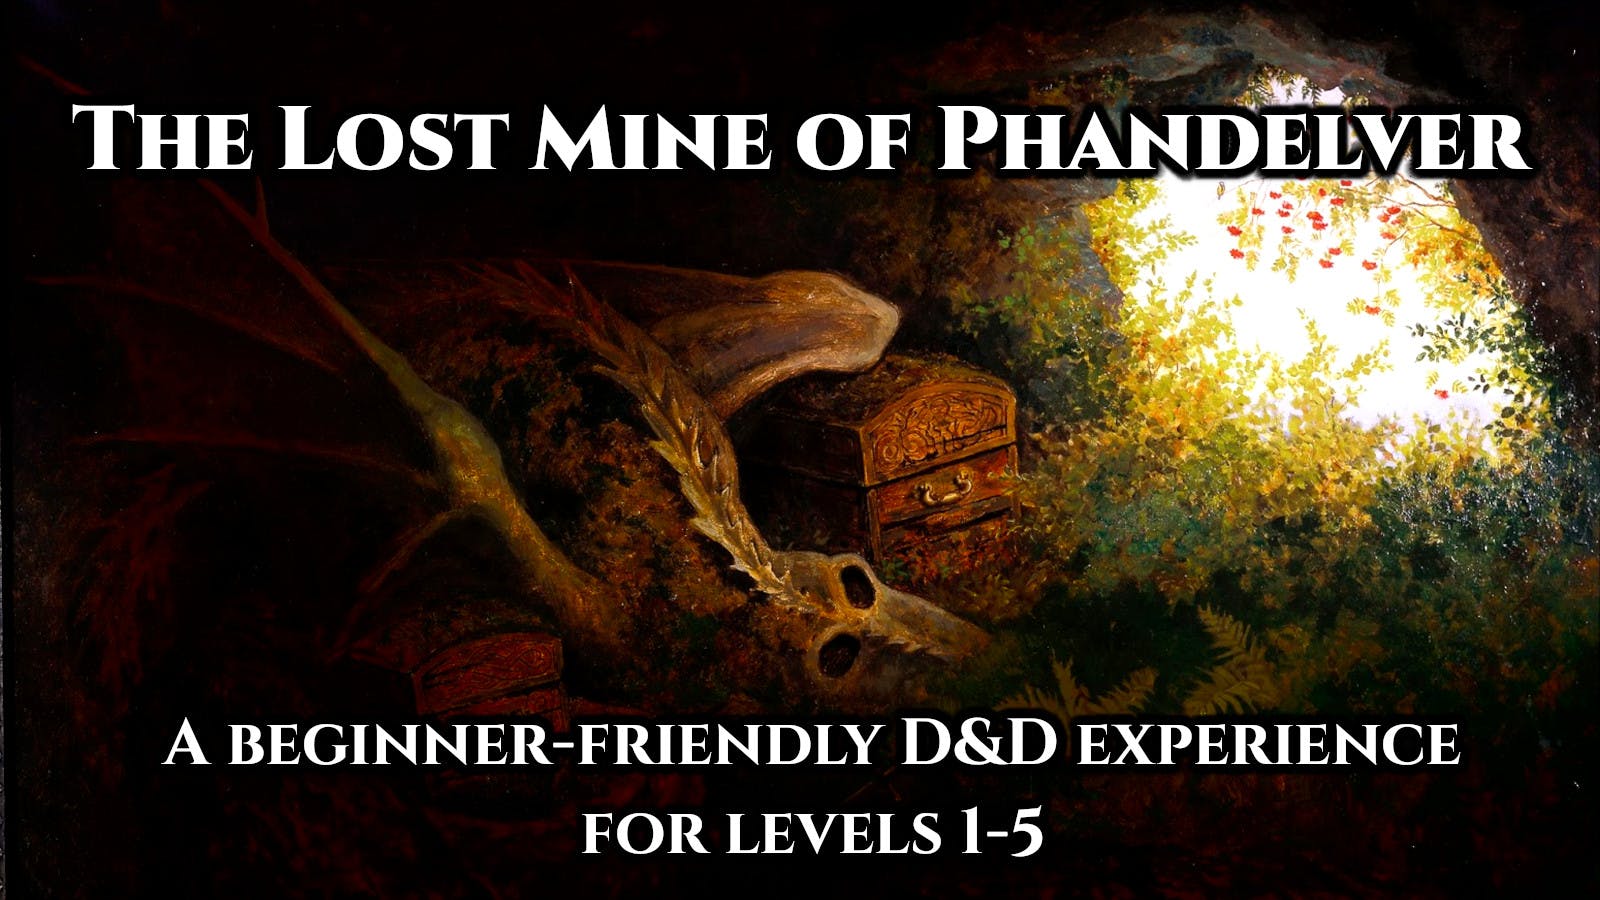 The Lost Mine of Phandelver ~ A Beginner-Friendly Game for Levels 1-5